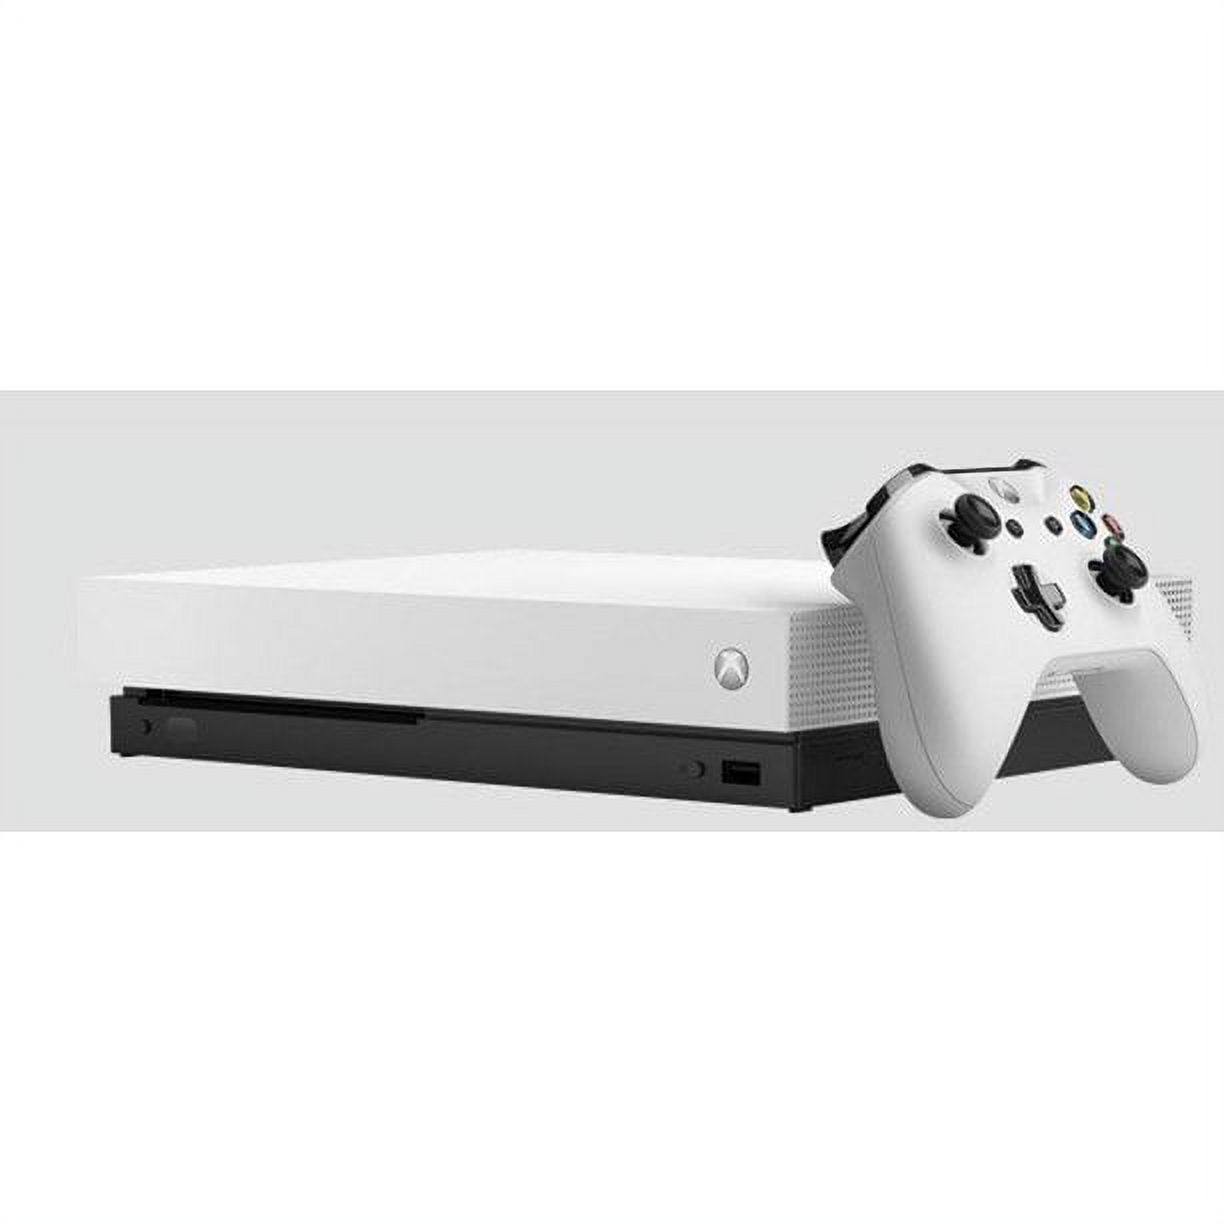 Restored Microsoft Xbox One X 1TB Gaming Console White with HDMI Cable (Refurbished) - image 1 of 1